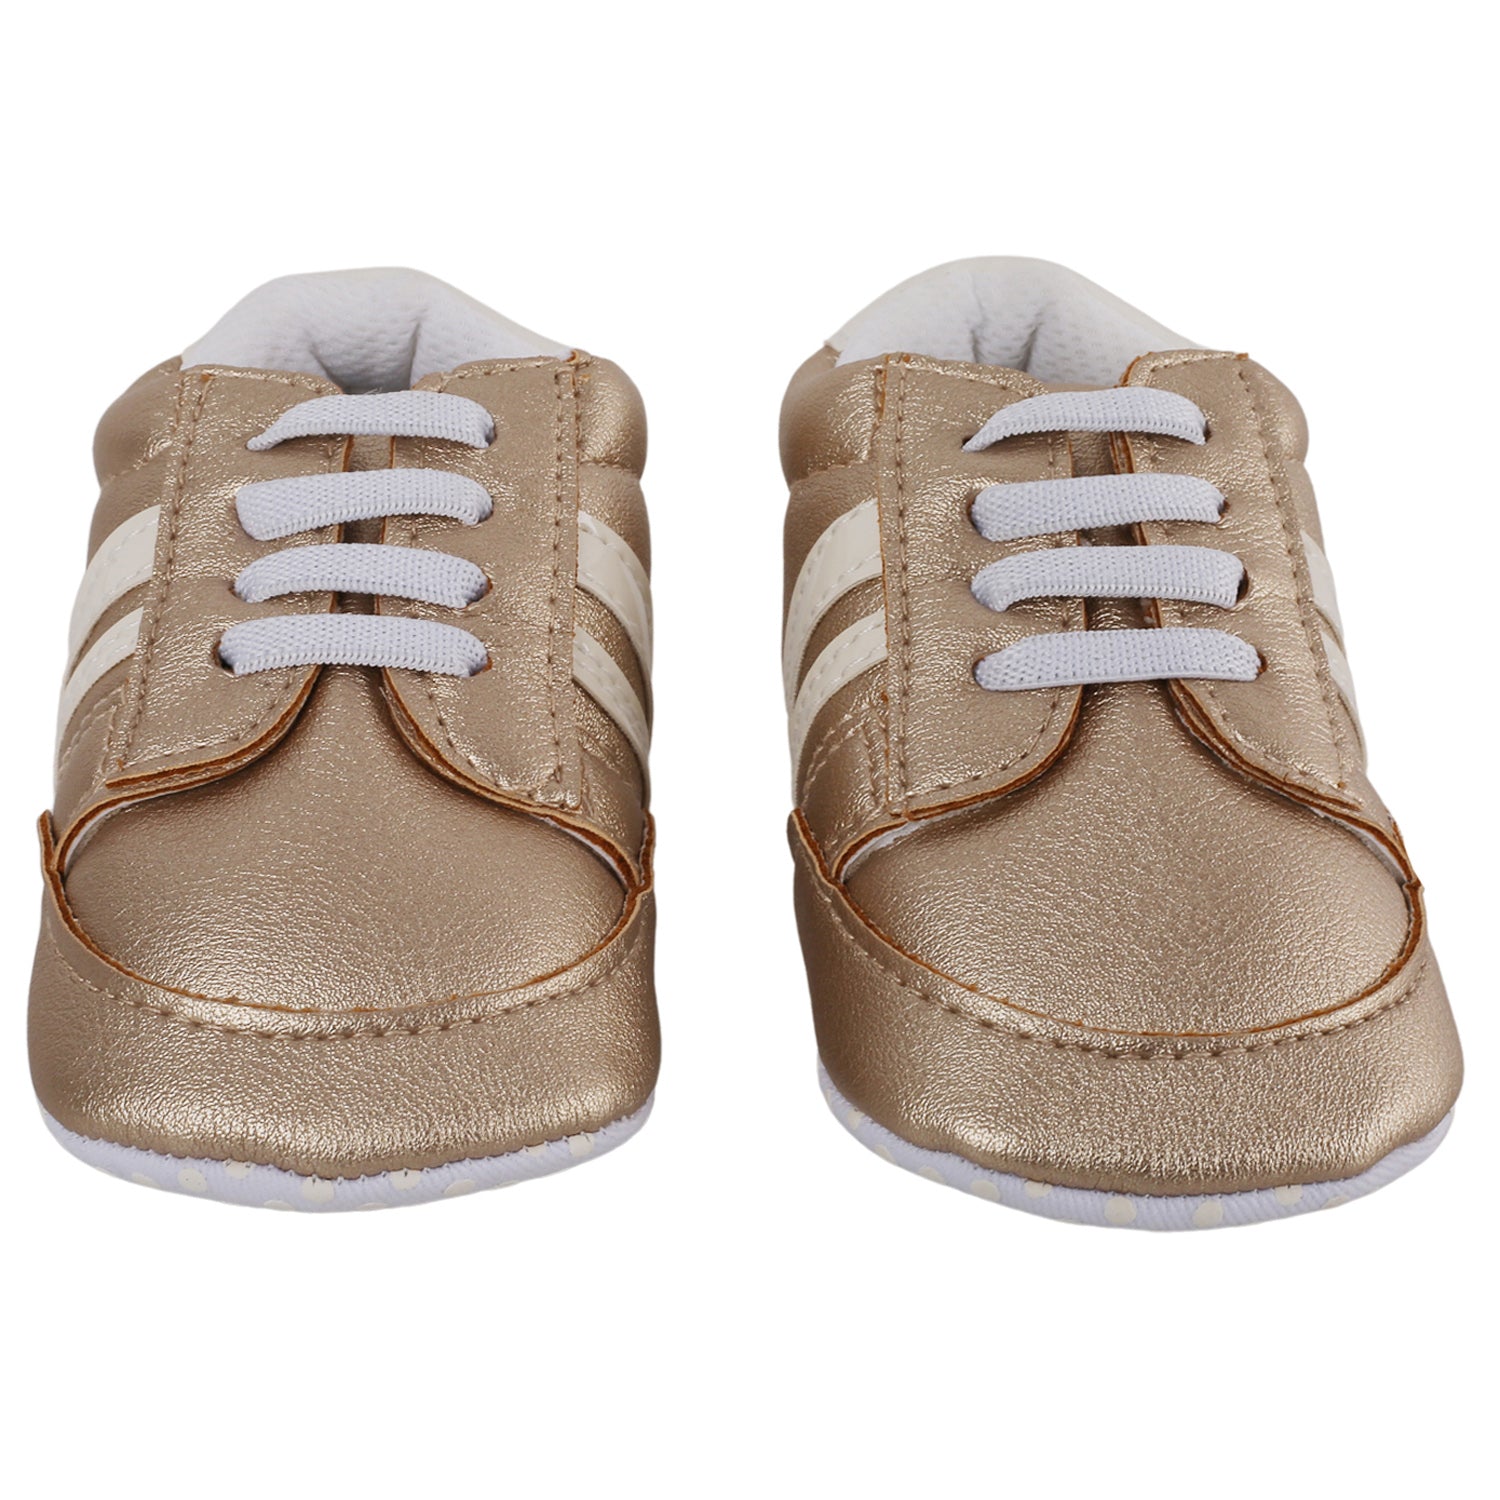 Baby Moo Striped Metallic Gold Lace Up Sneakers Booties